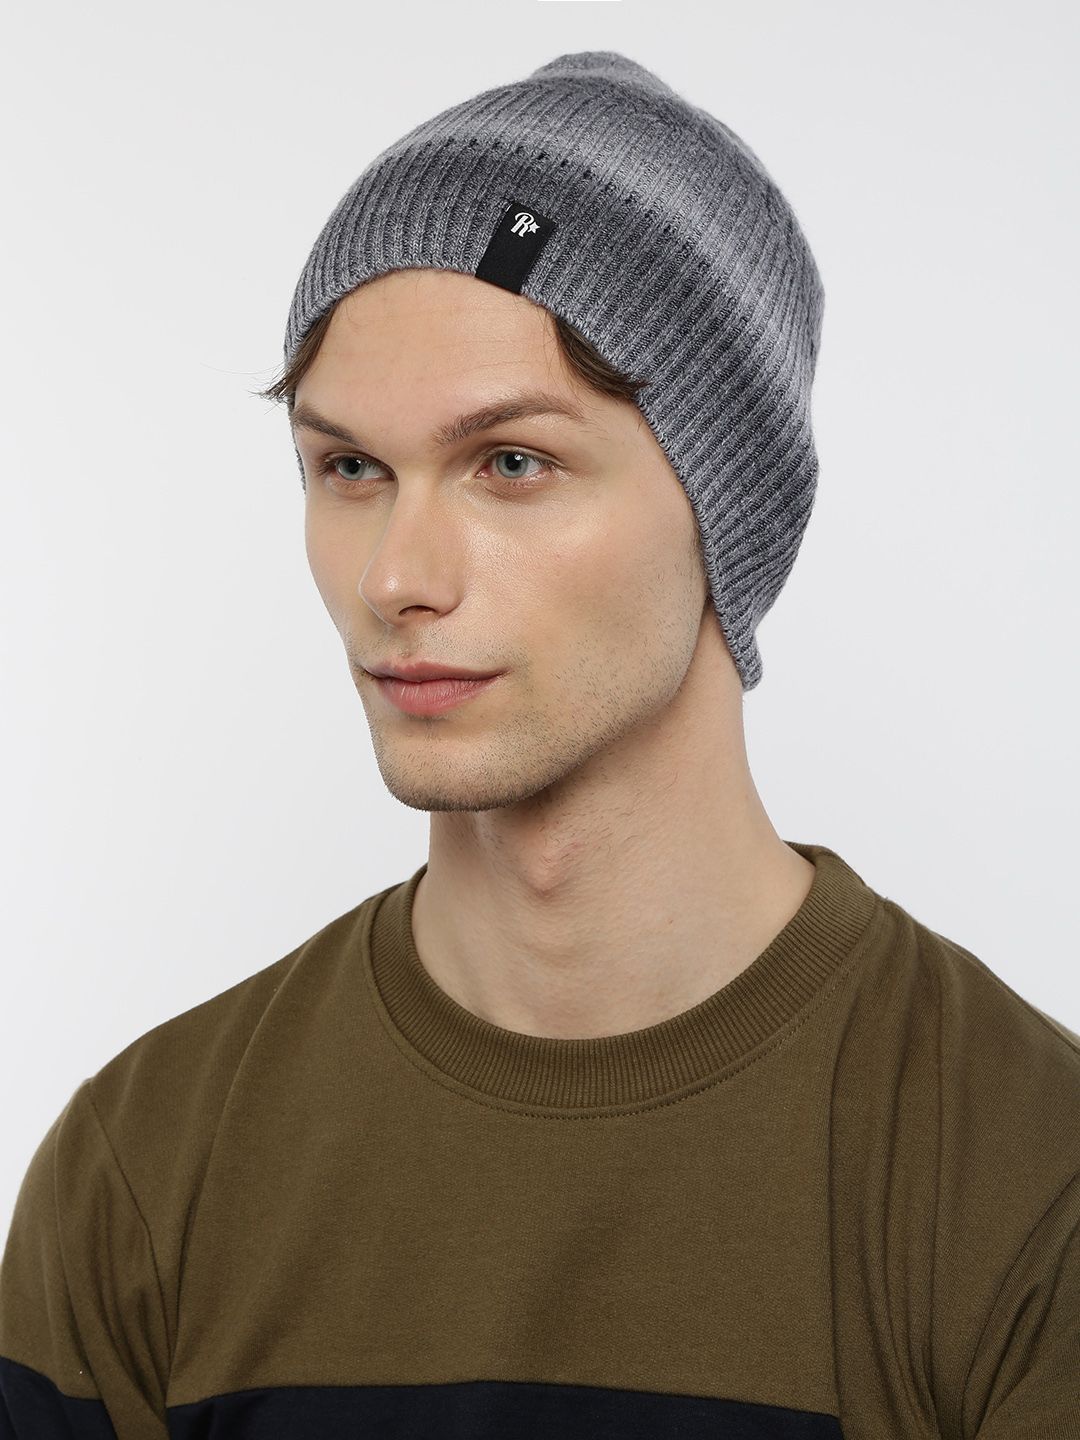 The Roadster Lifestyle Co Unisex Grey Self Design Beanie Price in India